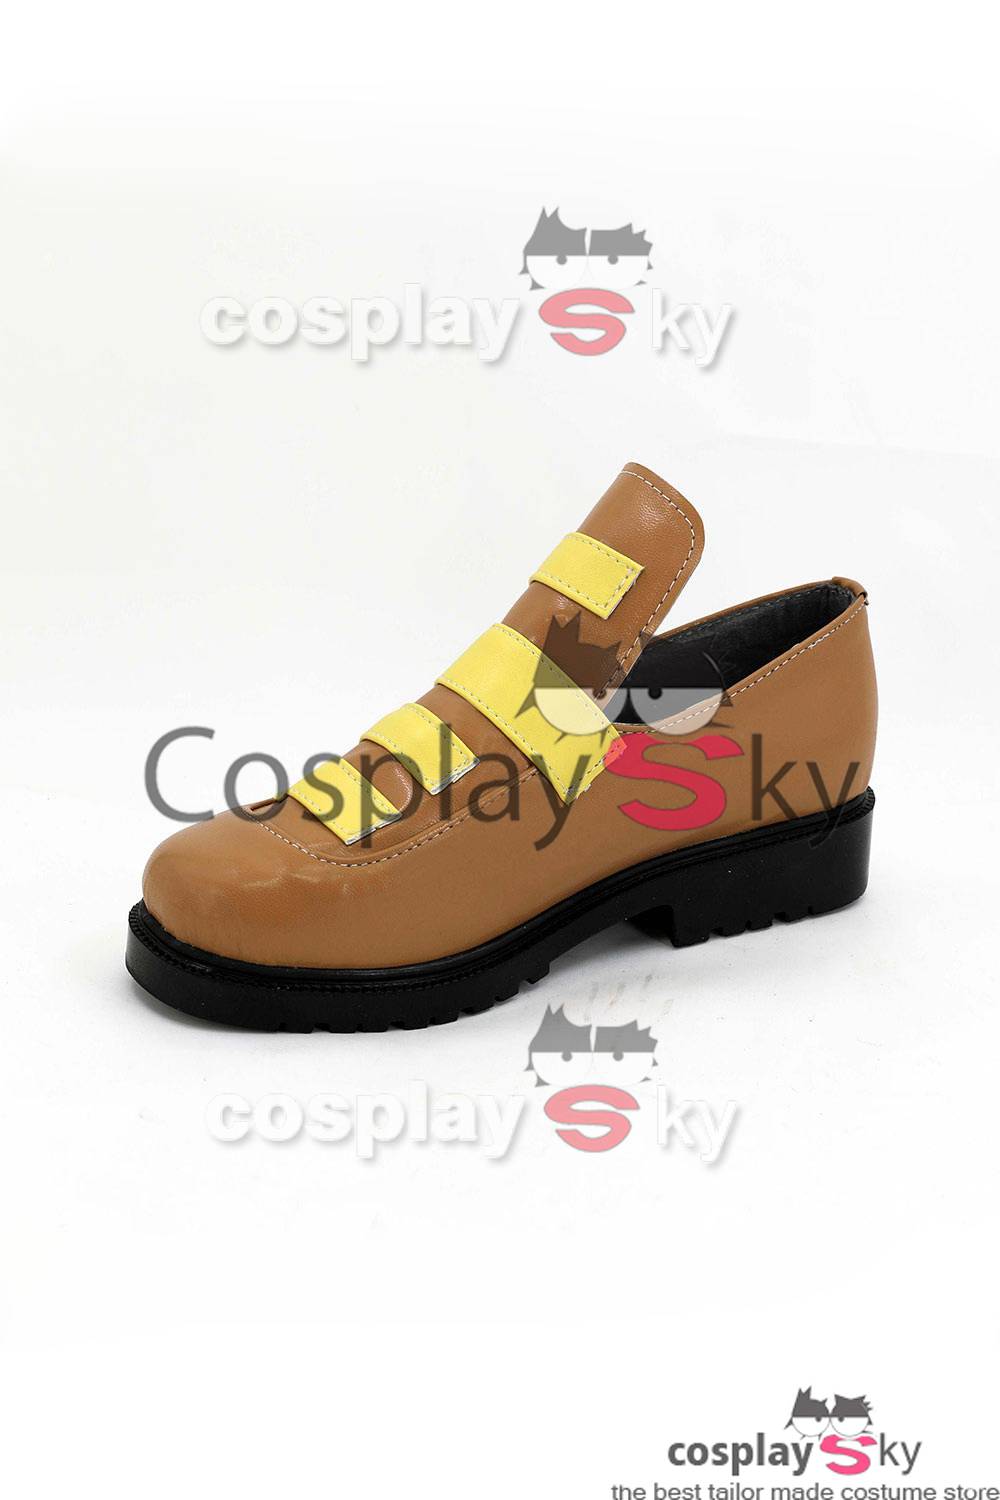 Mystic Messenger 707 EXTREME Saeyoung/Luciel Choi 7 Cosplay Chaussures